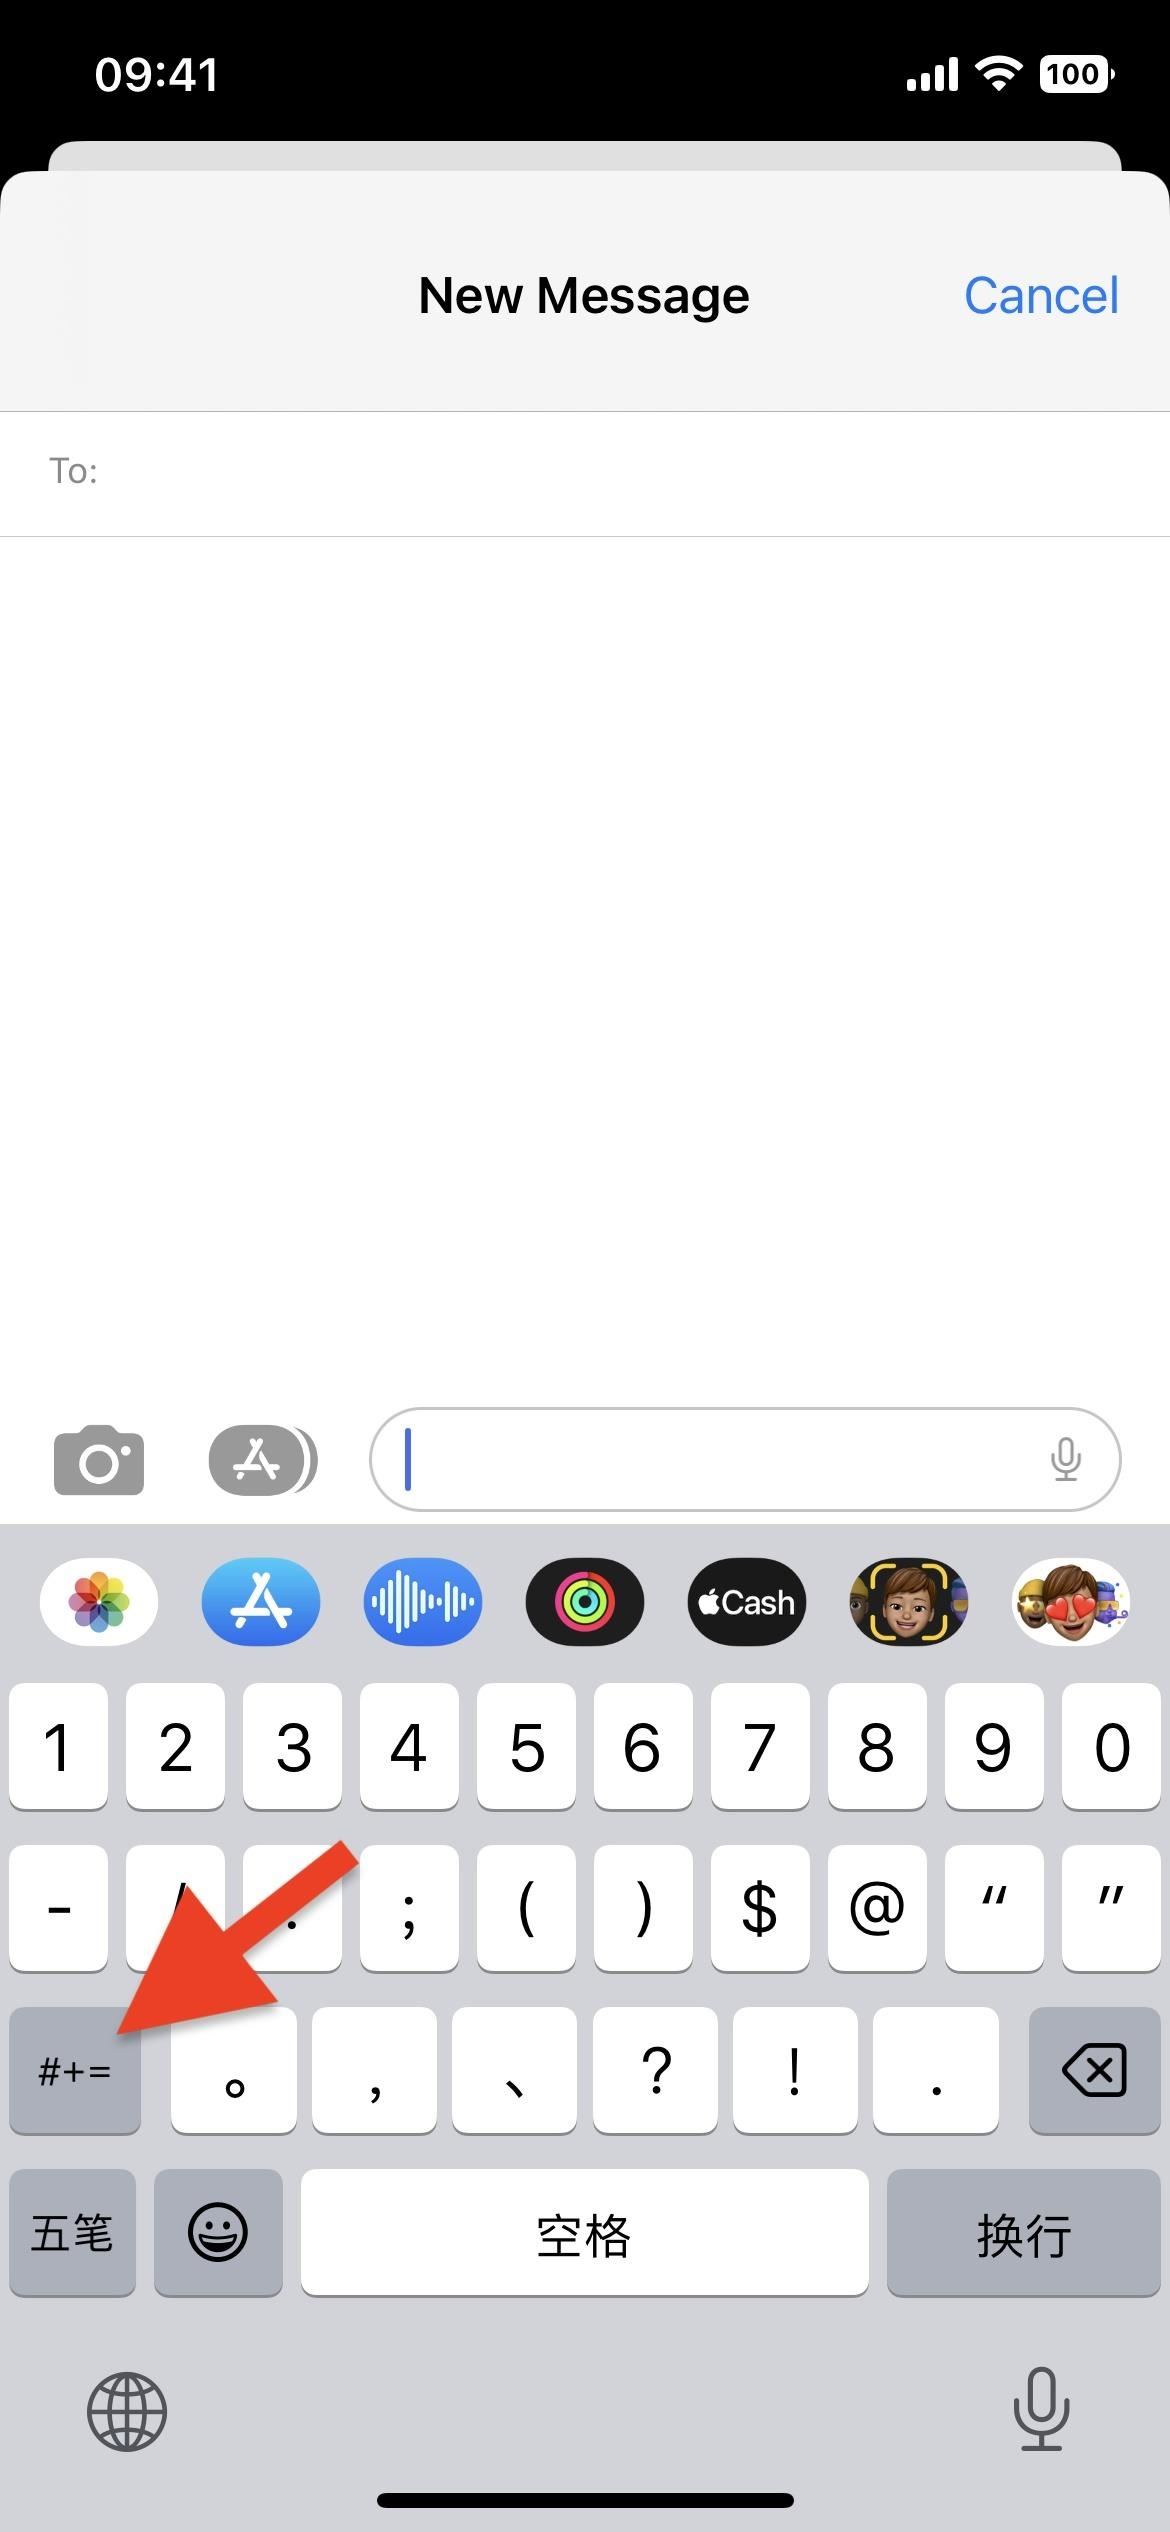 How to Unlock the Secret Emoticon Keyboard on Your iPhone